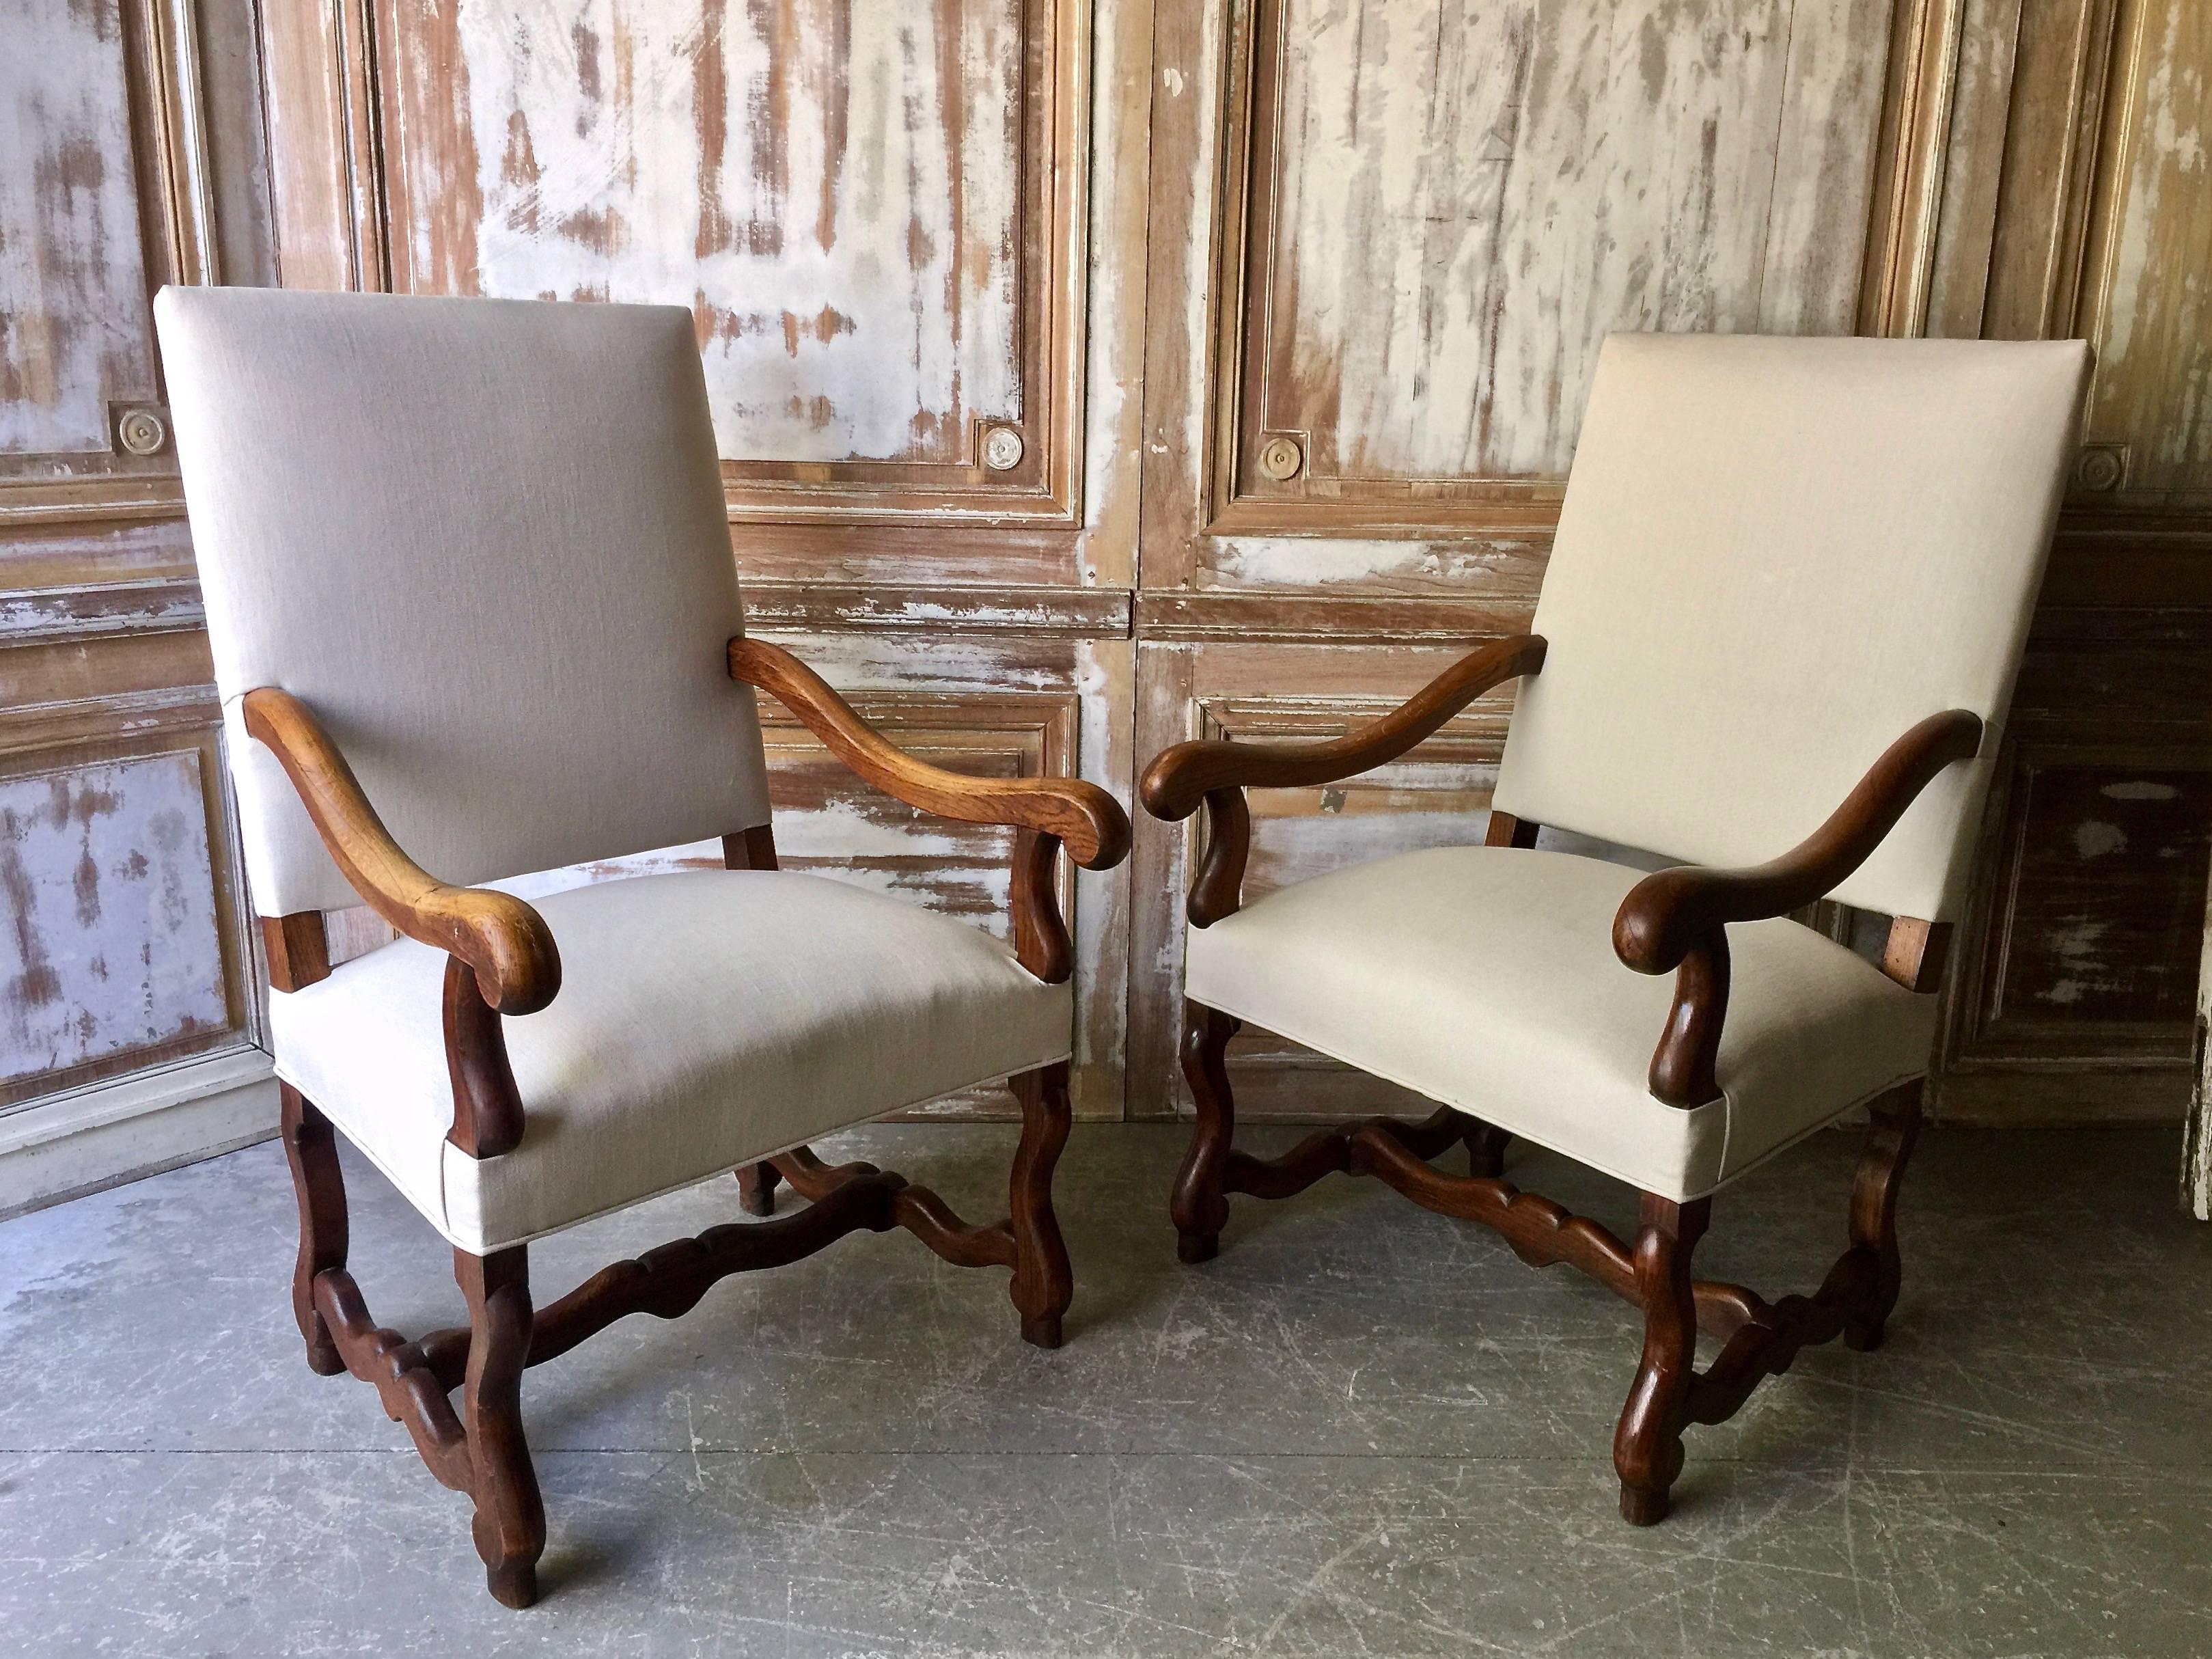 A large pair of French Fauteuil with billhead arms (bec de corbin) and H-shaped mutton-bone stretcher (os de mouton) in beautifully patinated oak. Upholstered in modern time linen. Very comfortable large chairs,
France, circa late 18th